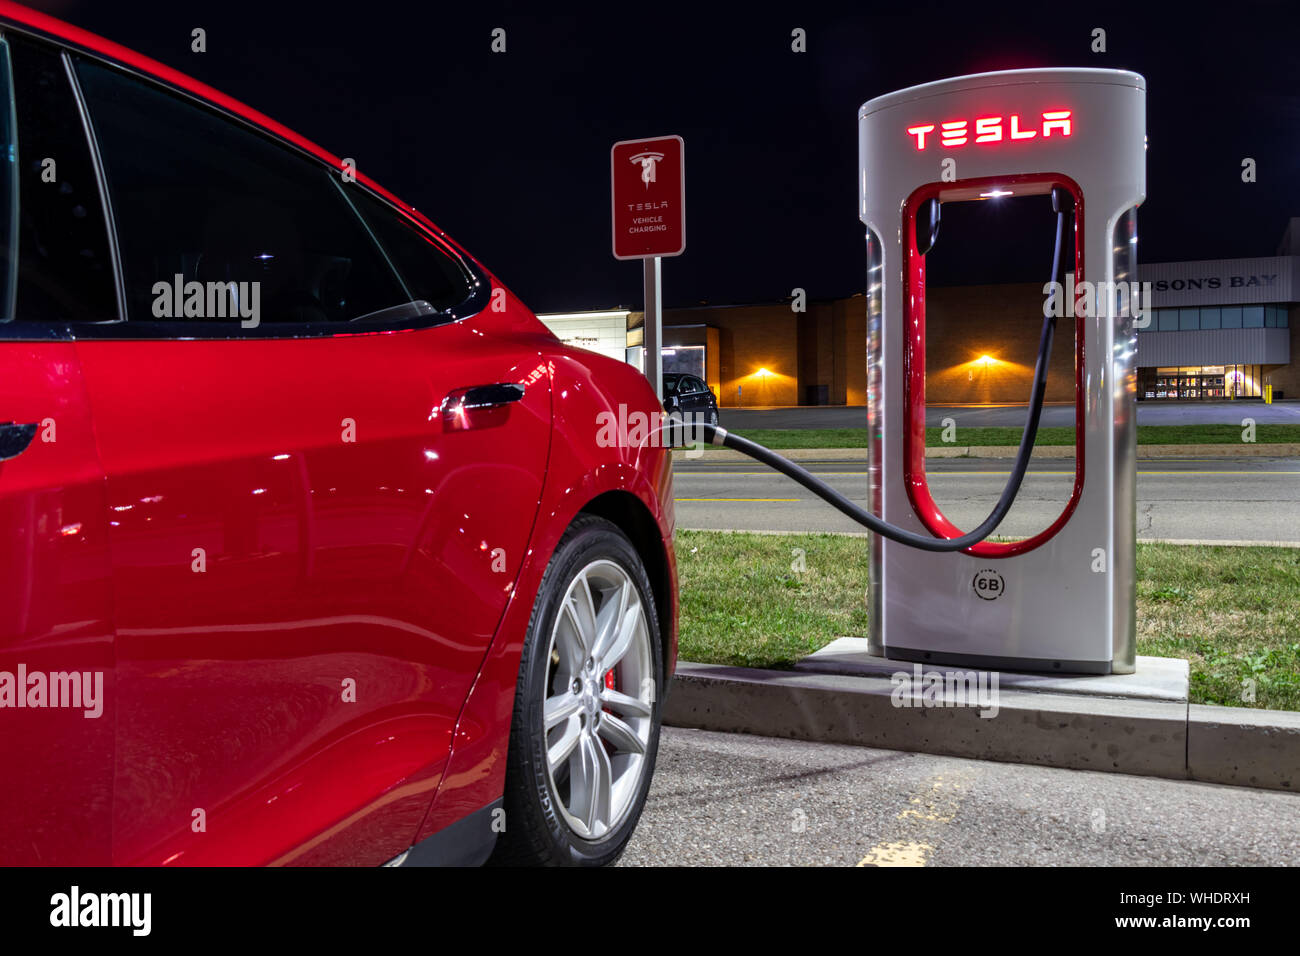 Red Tesla Model S plugged-in and charging at Tesla Supercharger late at night. Stock Photo